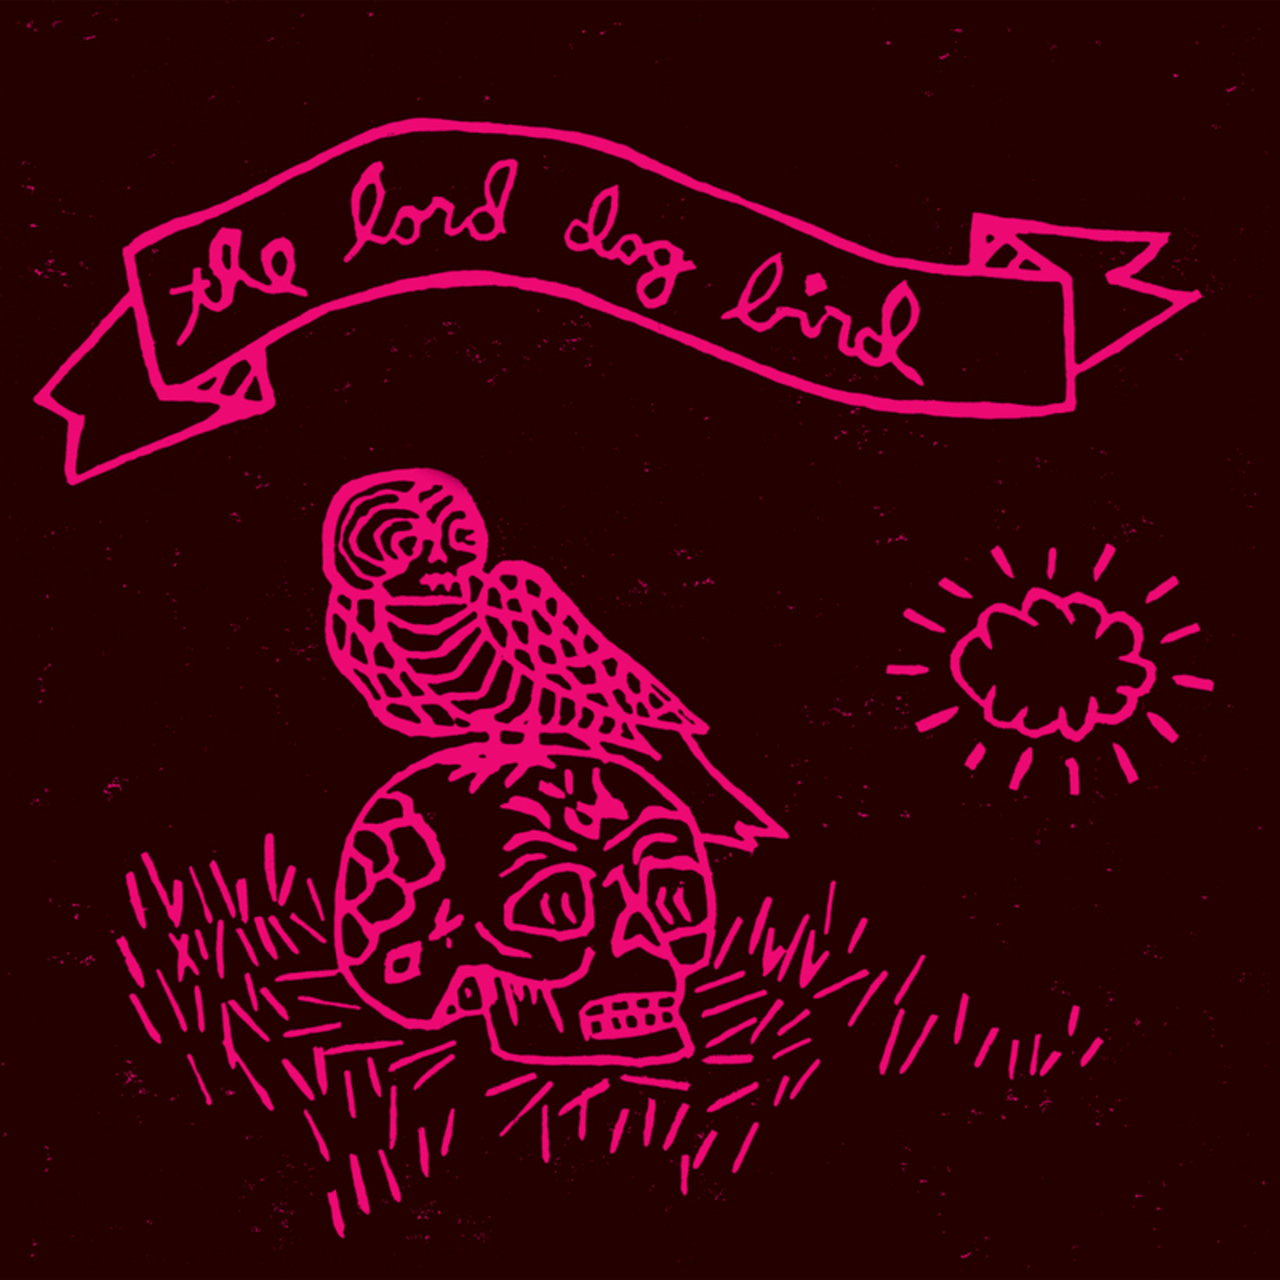 The Lord Dog Bird's self-titled album is out now.